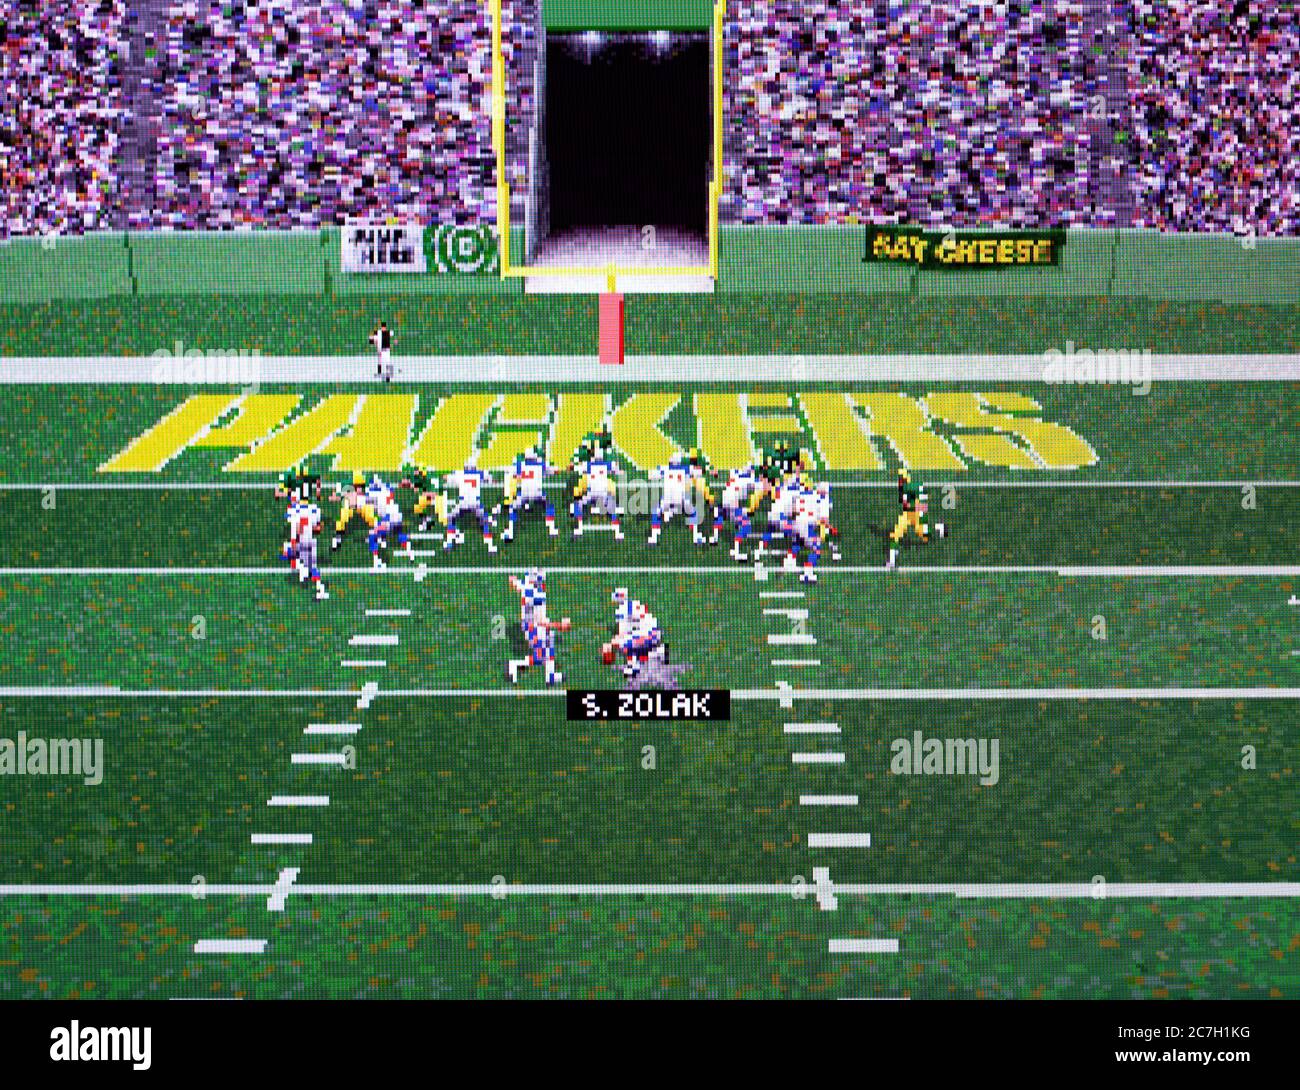 Madden NFL 98 - Sega Saturn Videogame - Editorial use only Stock Photo